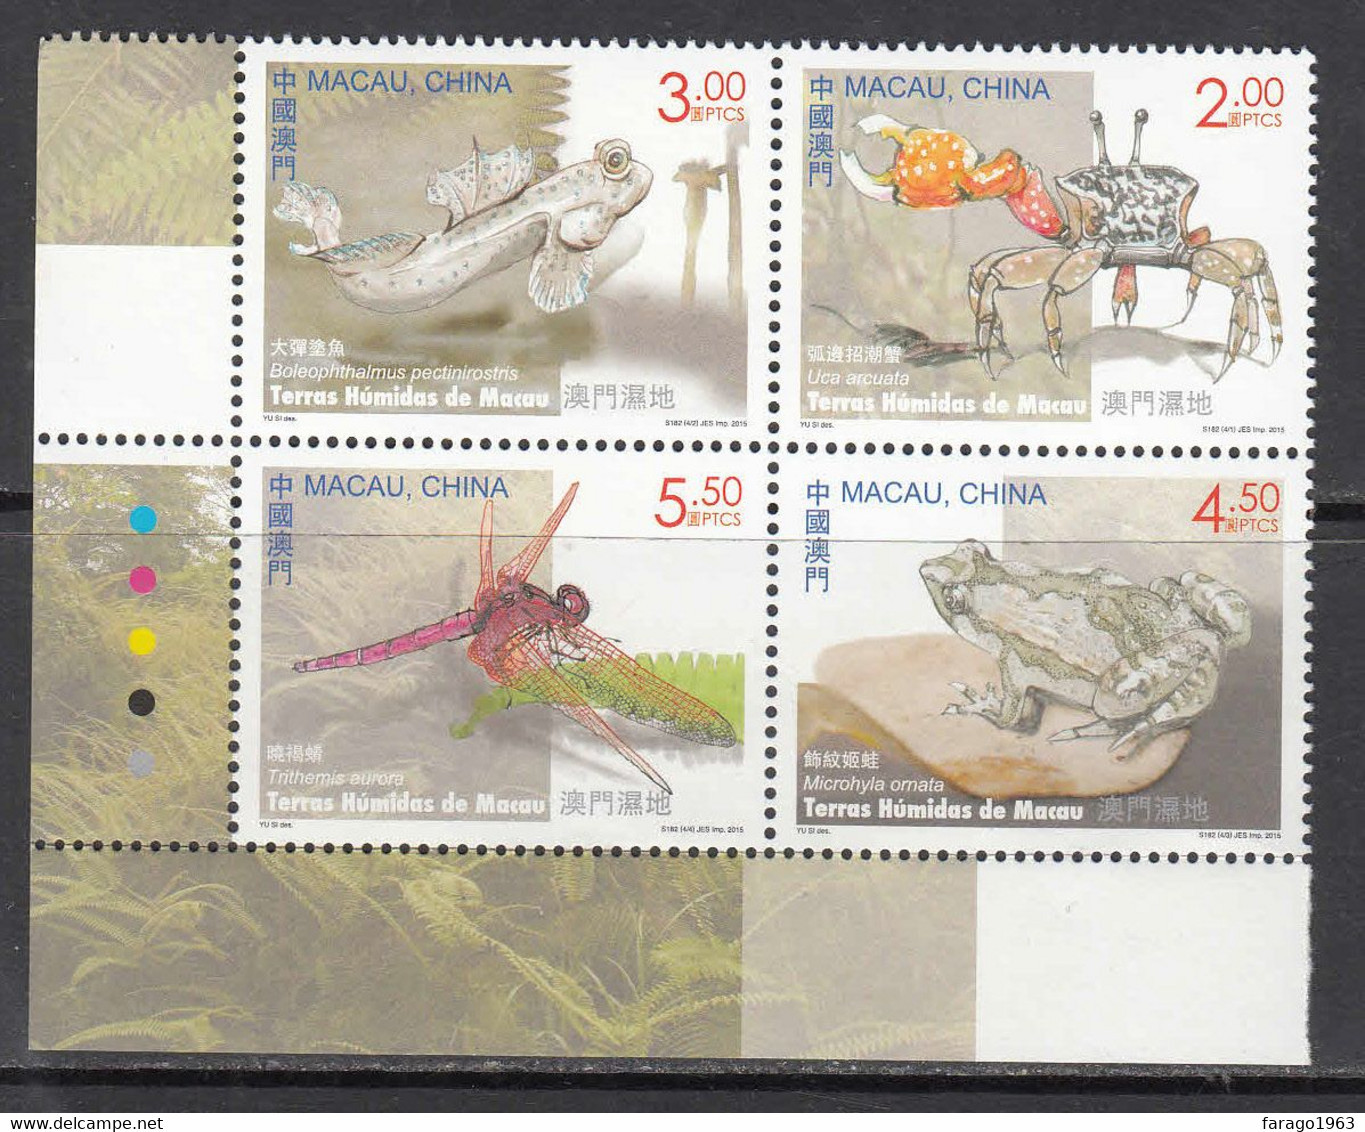 2015 Macau Wetlands Wildlife Crabs Fish Insects Frogs Complete Set Block Of 4 MNH @  FACE VALUE - Unused Stamps